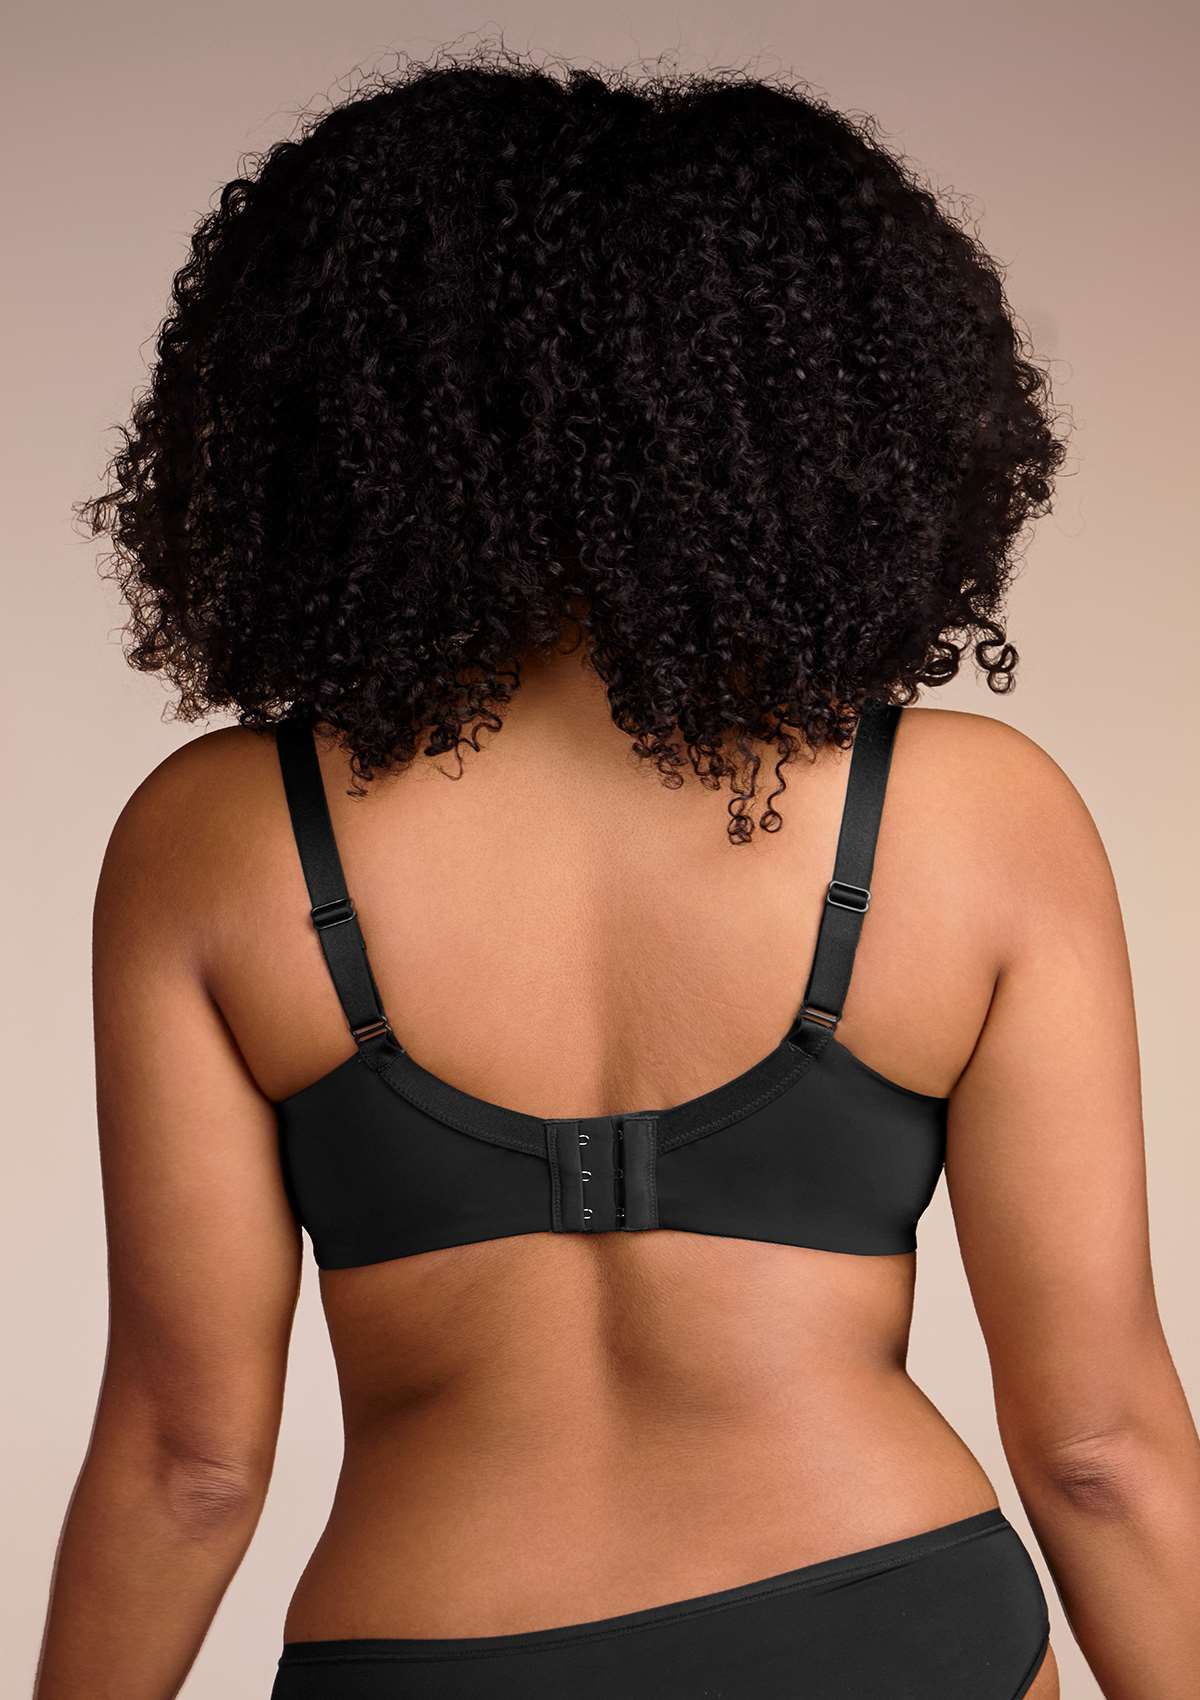 HSIA Gemma Smooth Padded T-shirt Everyday Bras - For Lift And Comfort - Black / 40 / DDD/F